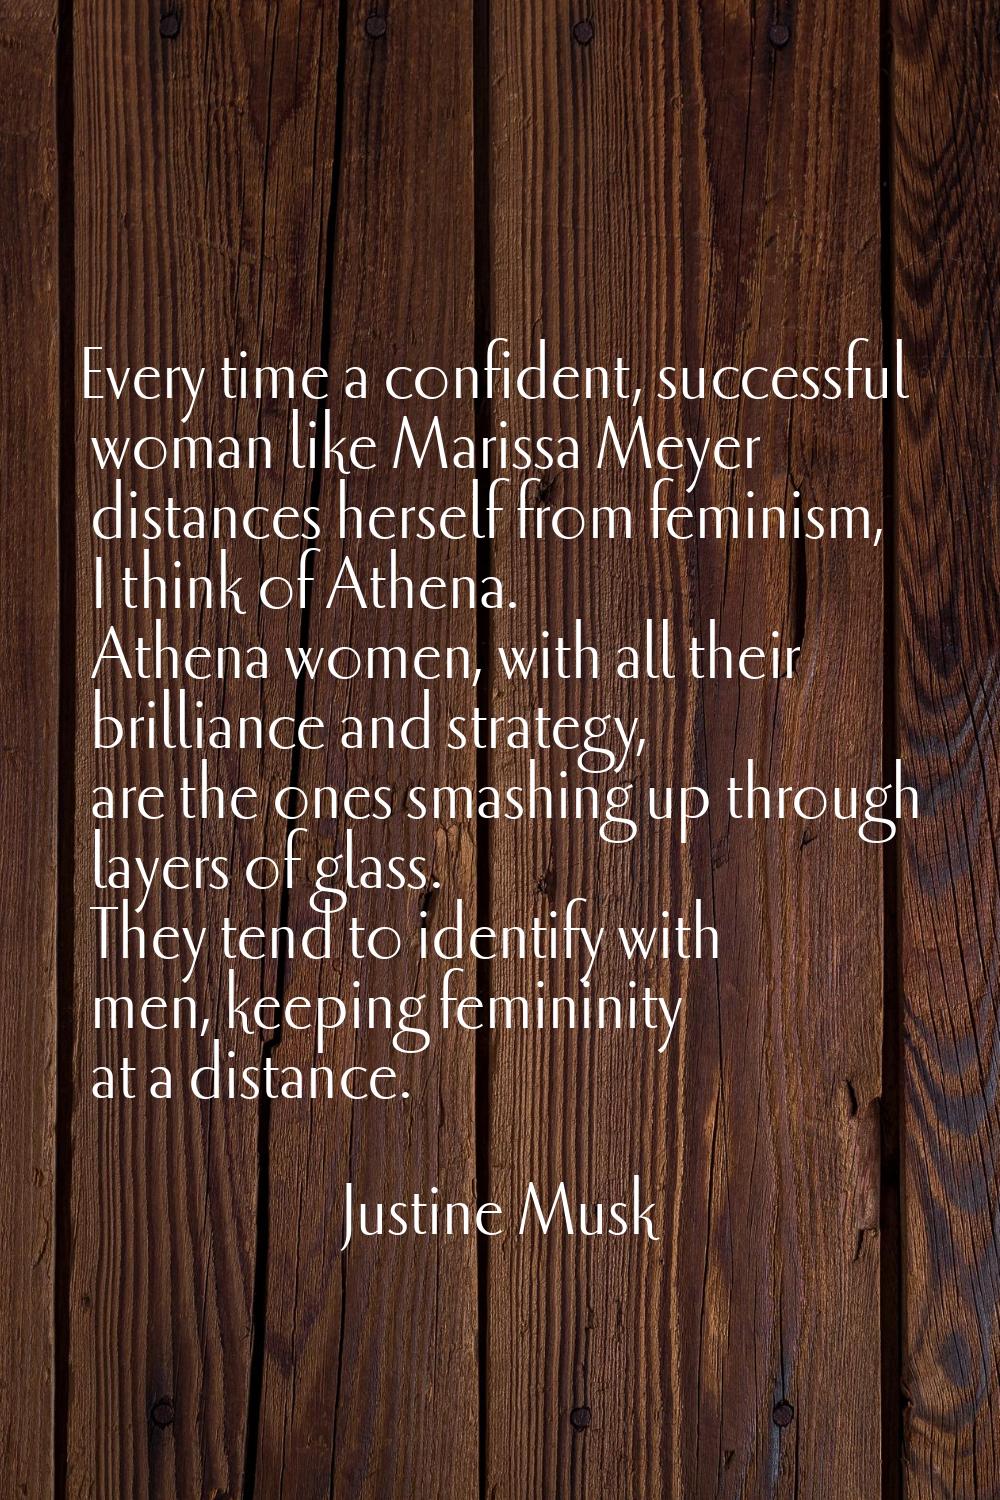 Every time a confident, successful woman like Marissa Meyer distances herself from feminism, I thin